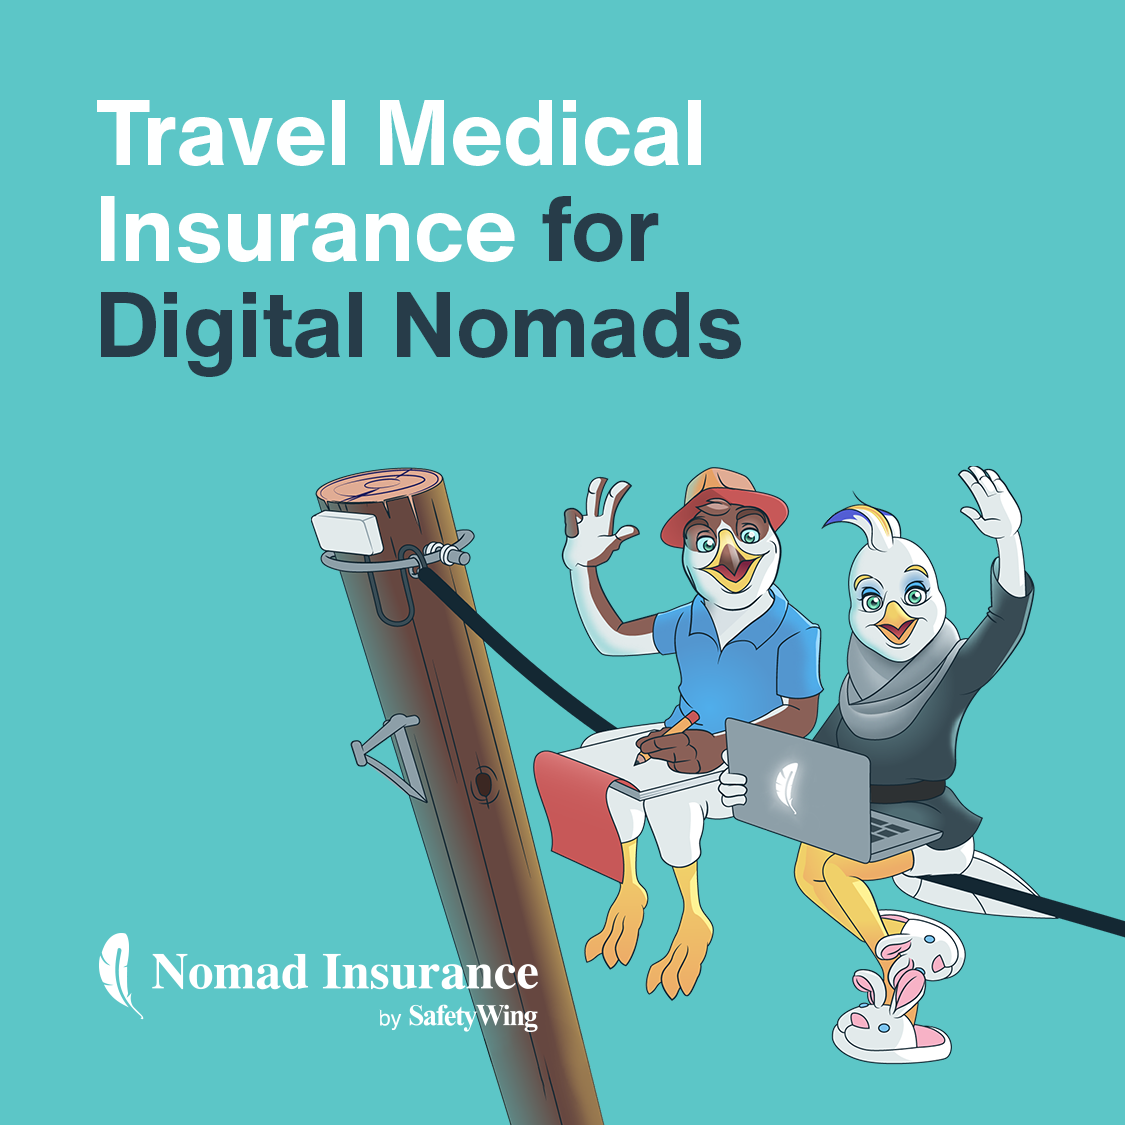 Get a travel medical insurance!